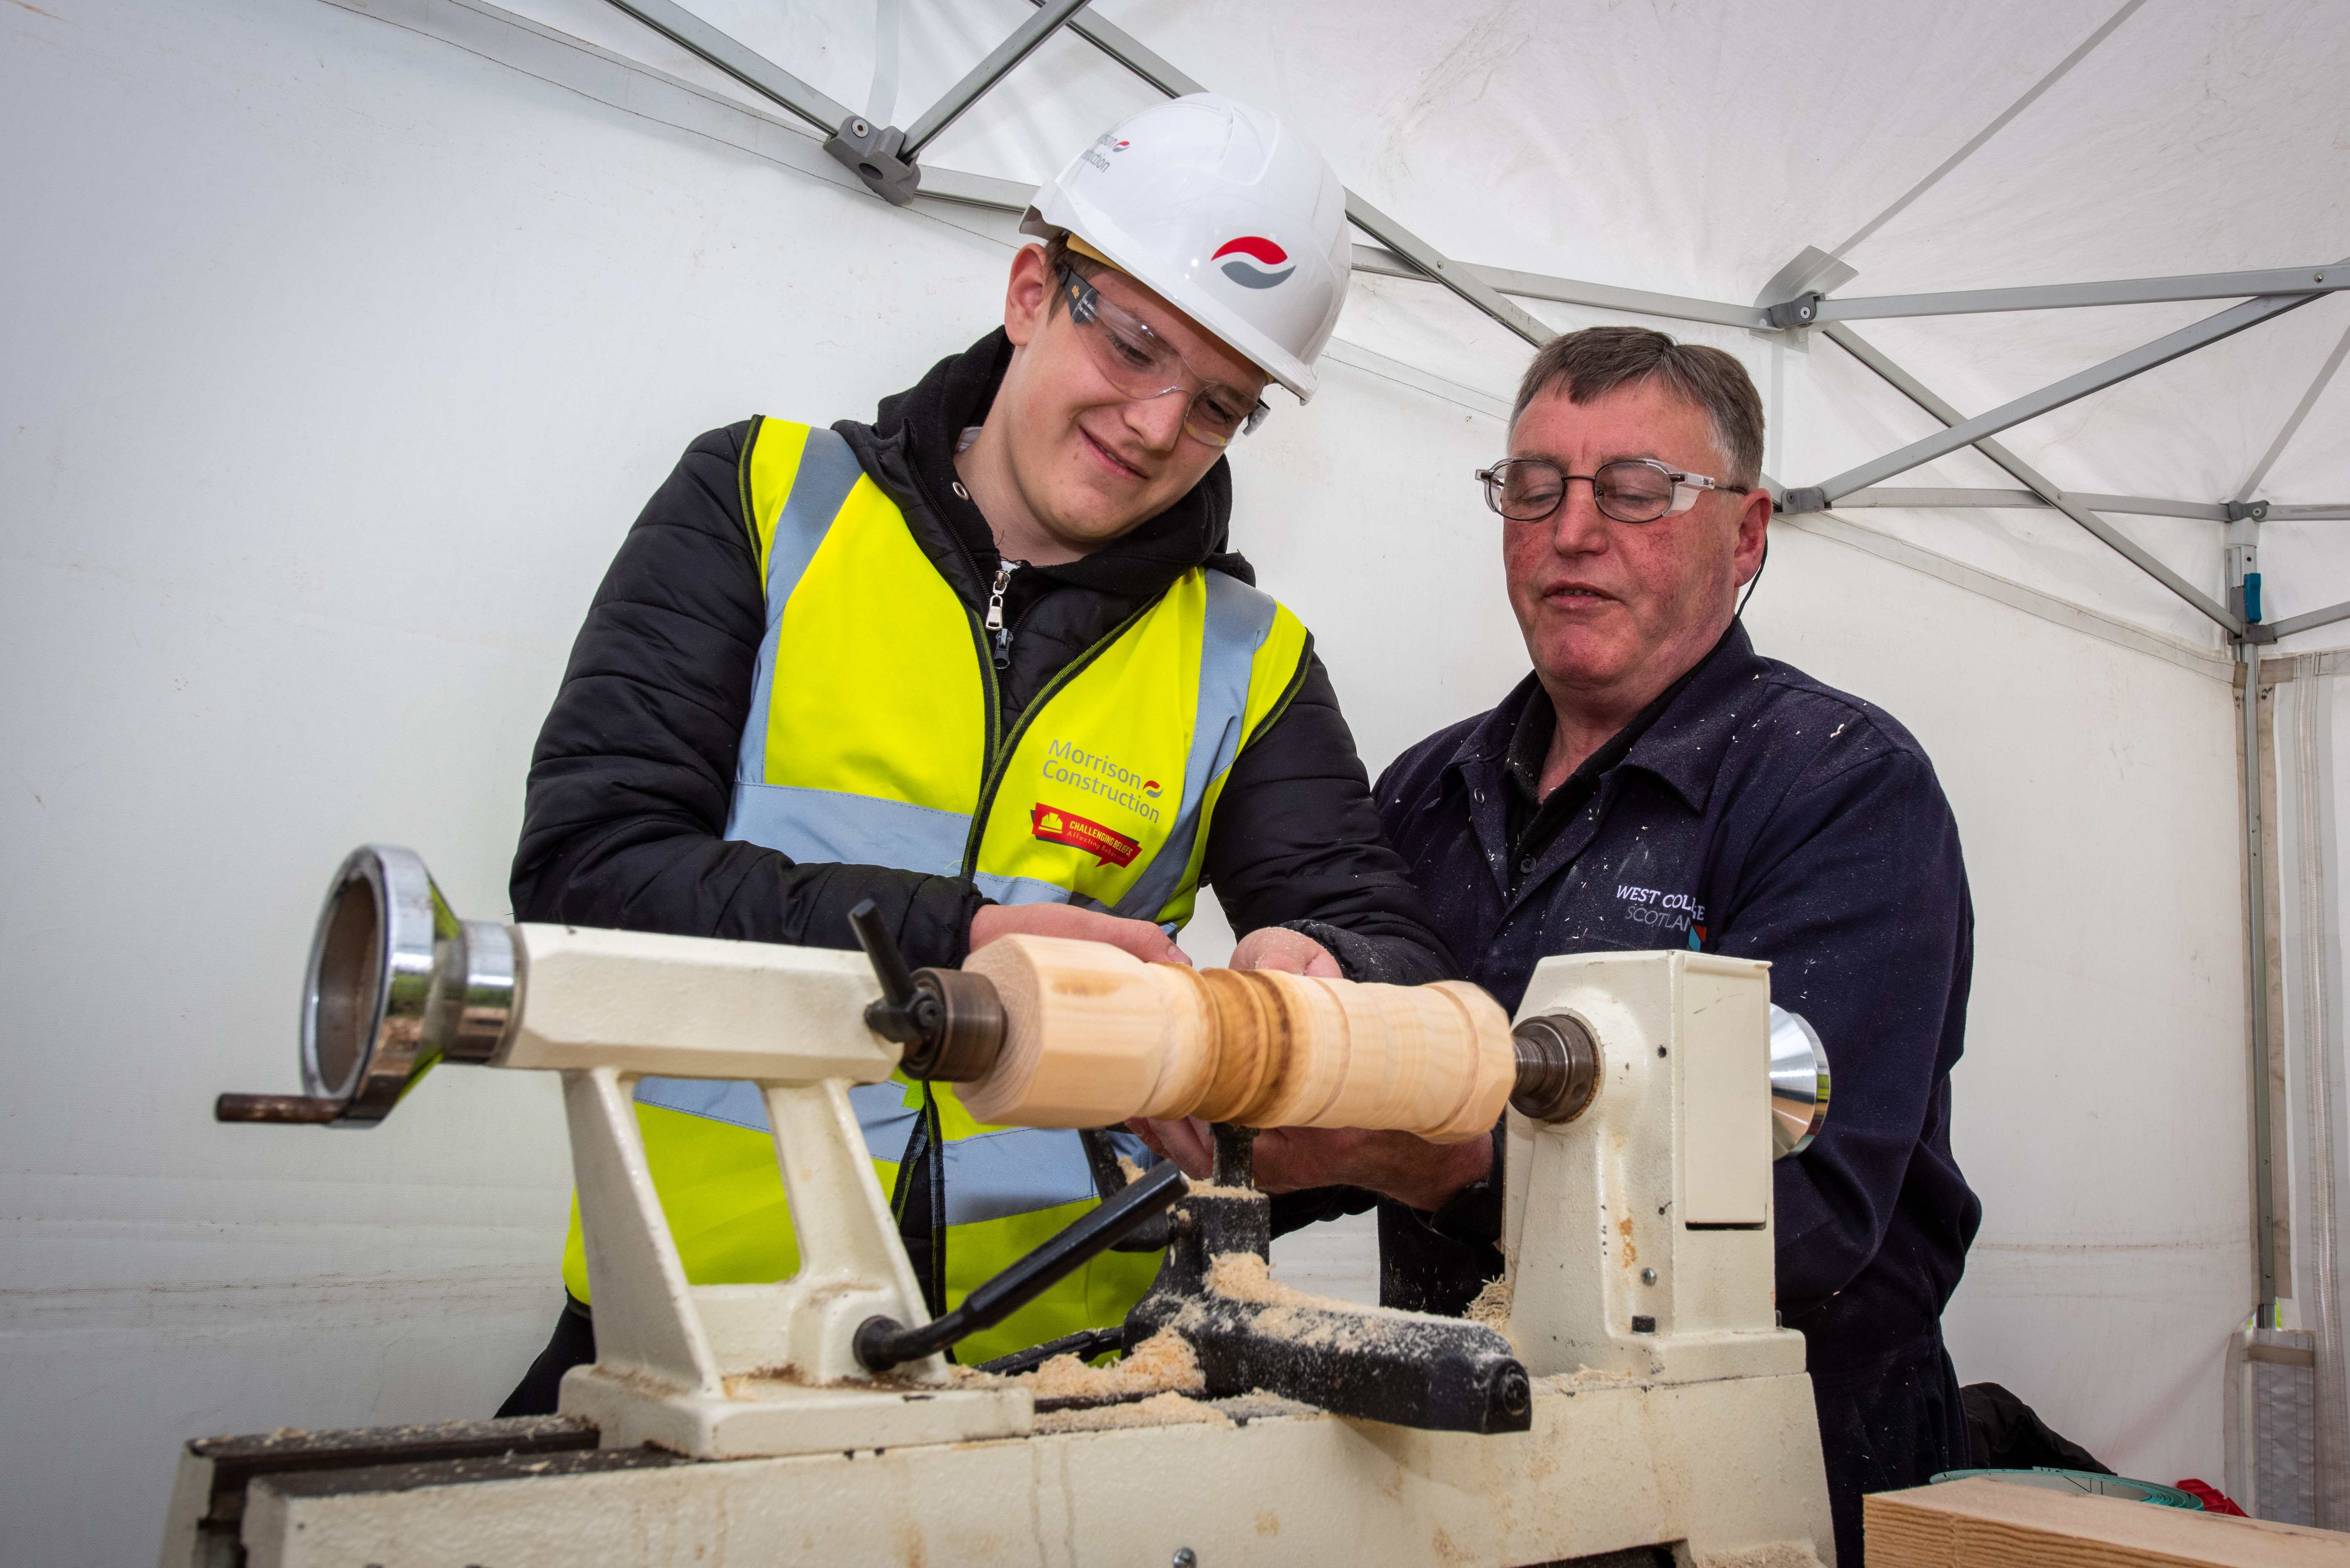 Young people get hands-on experience of traditional building crafts